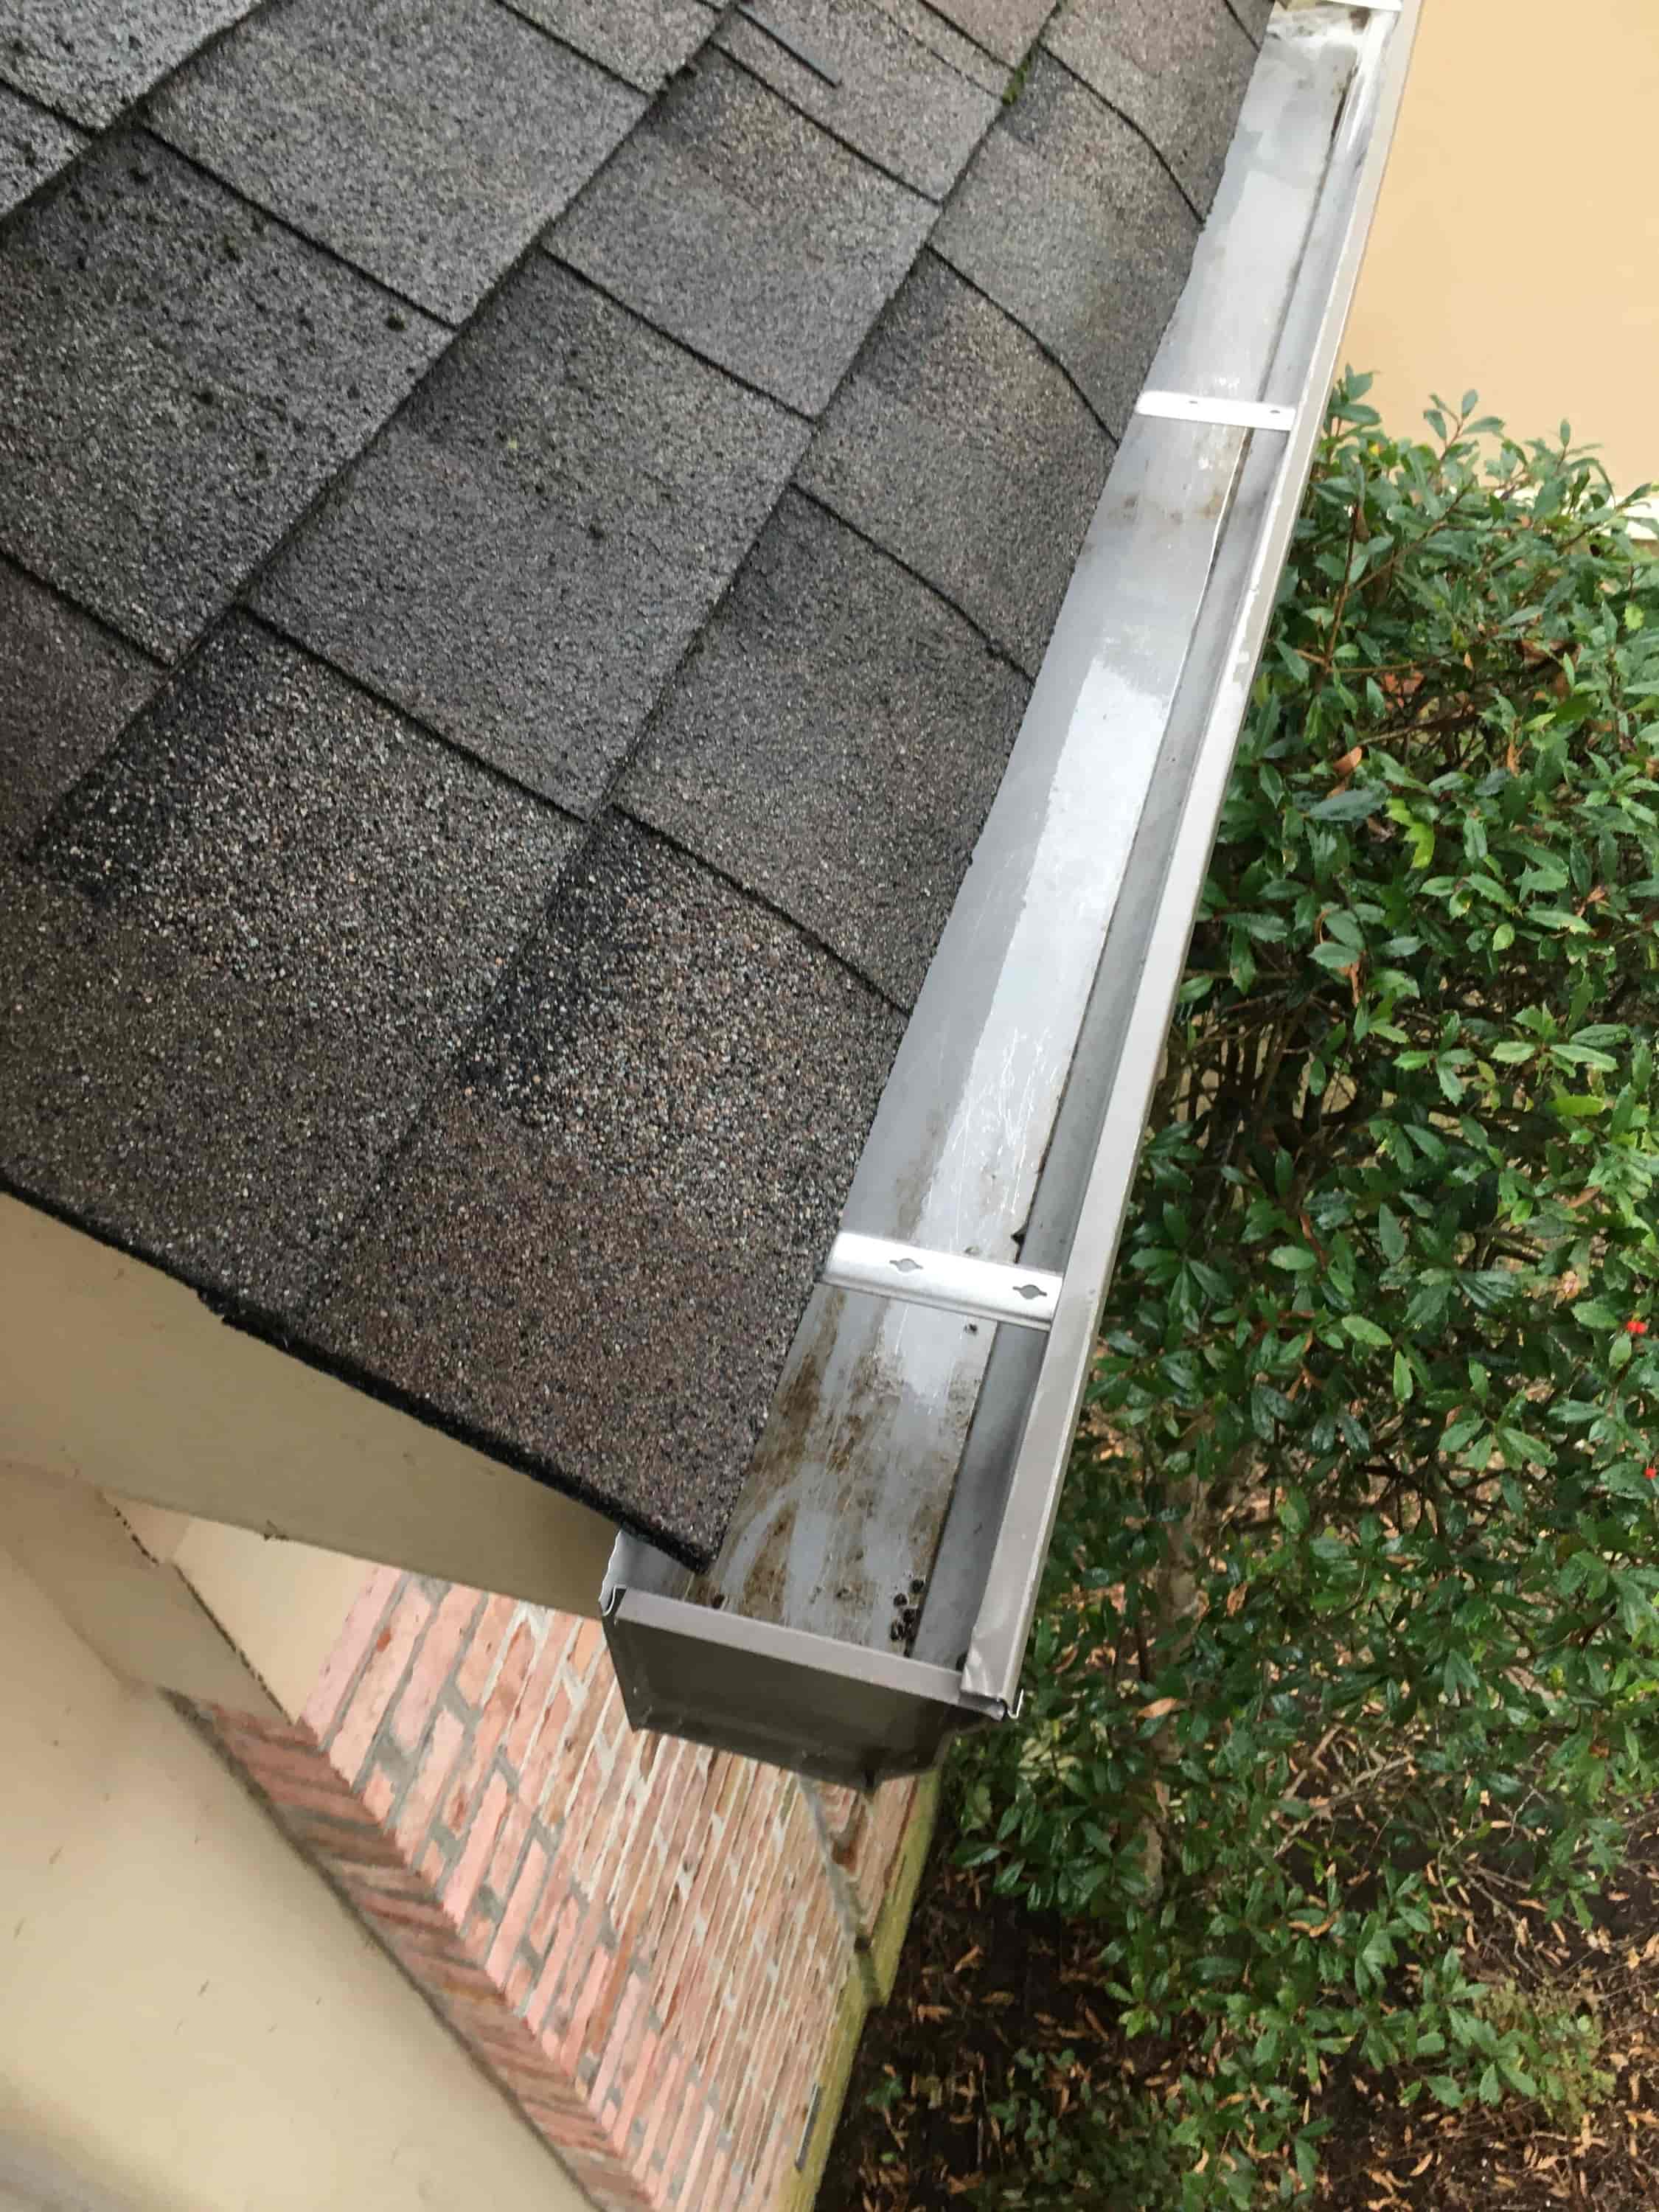 gutter cleaning specialists